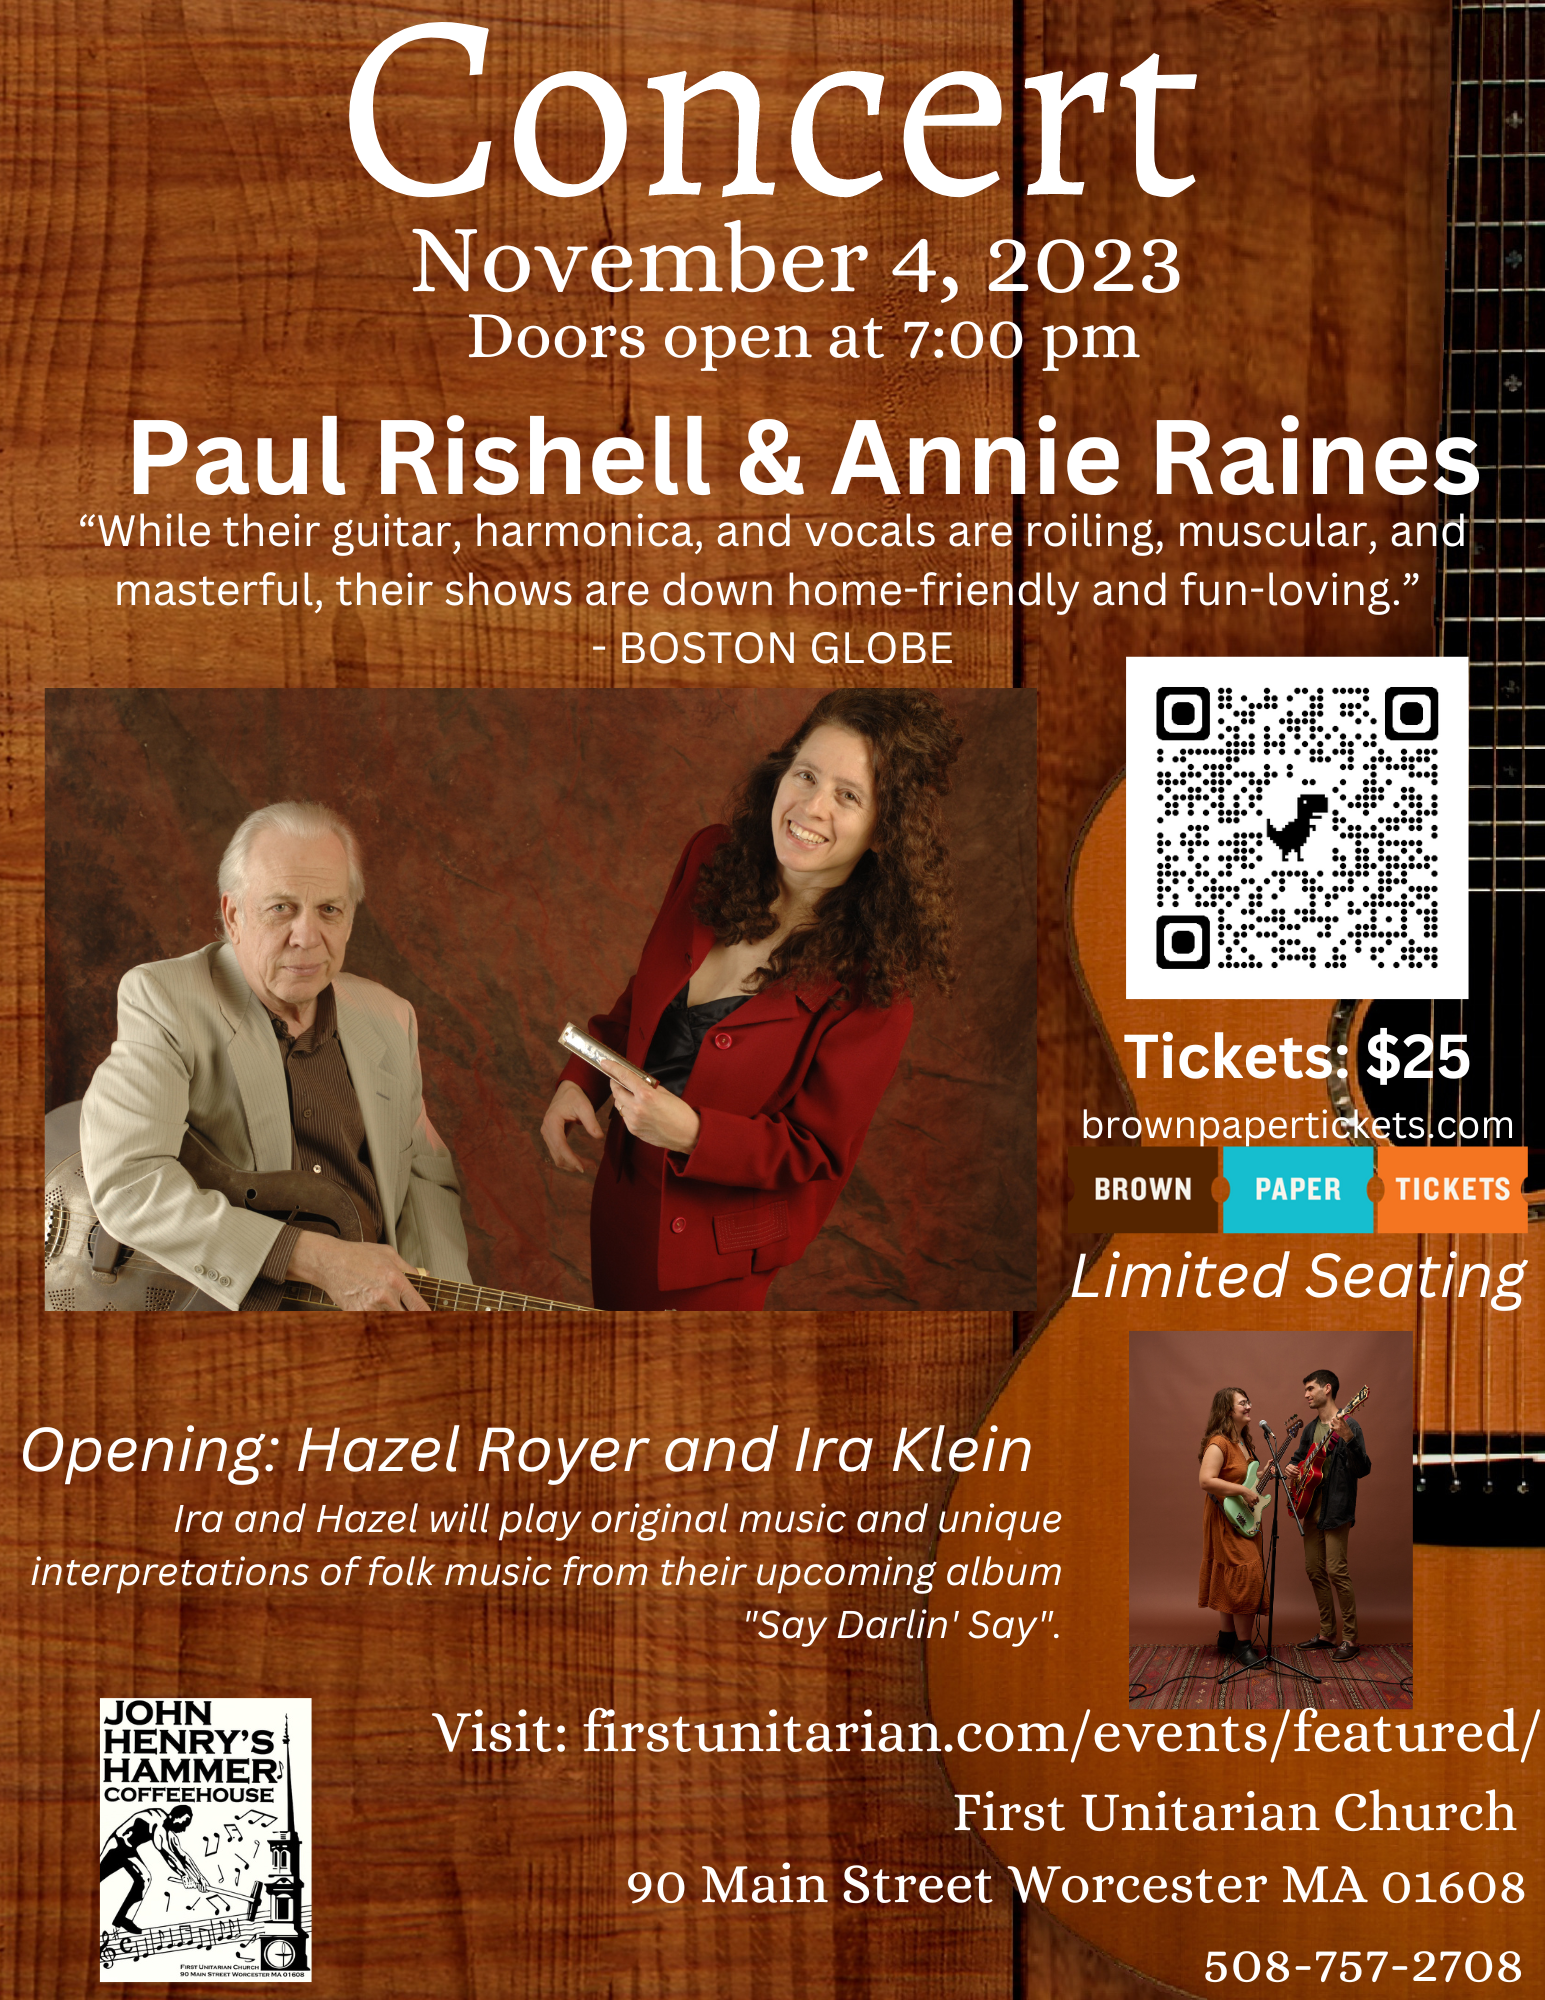 Paul Rishell and Annie Raines Concert